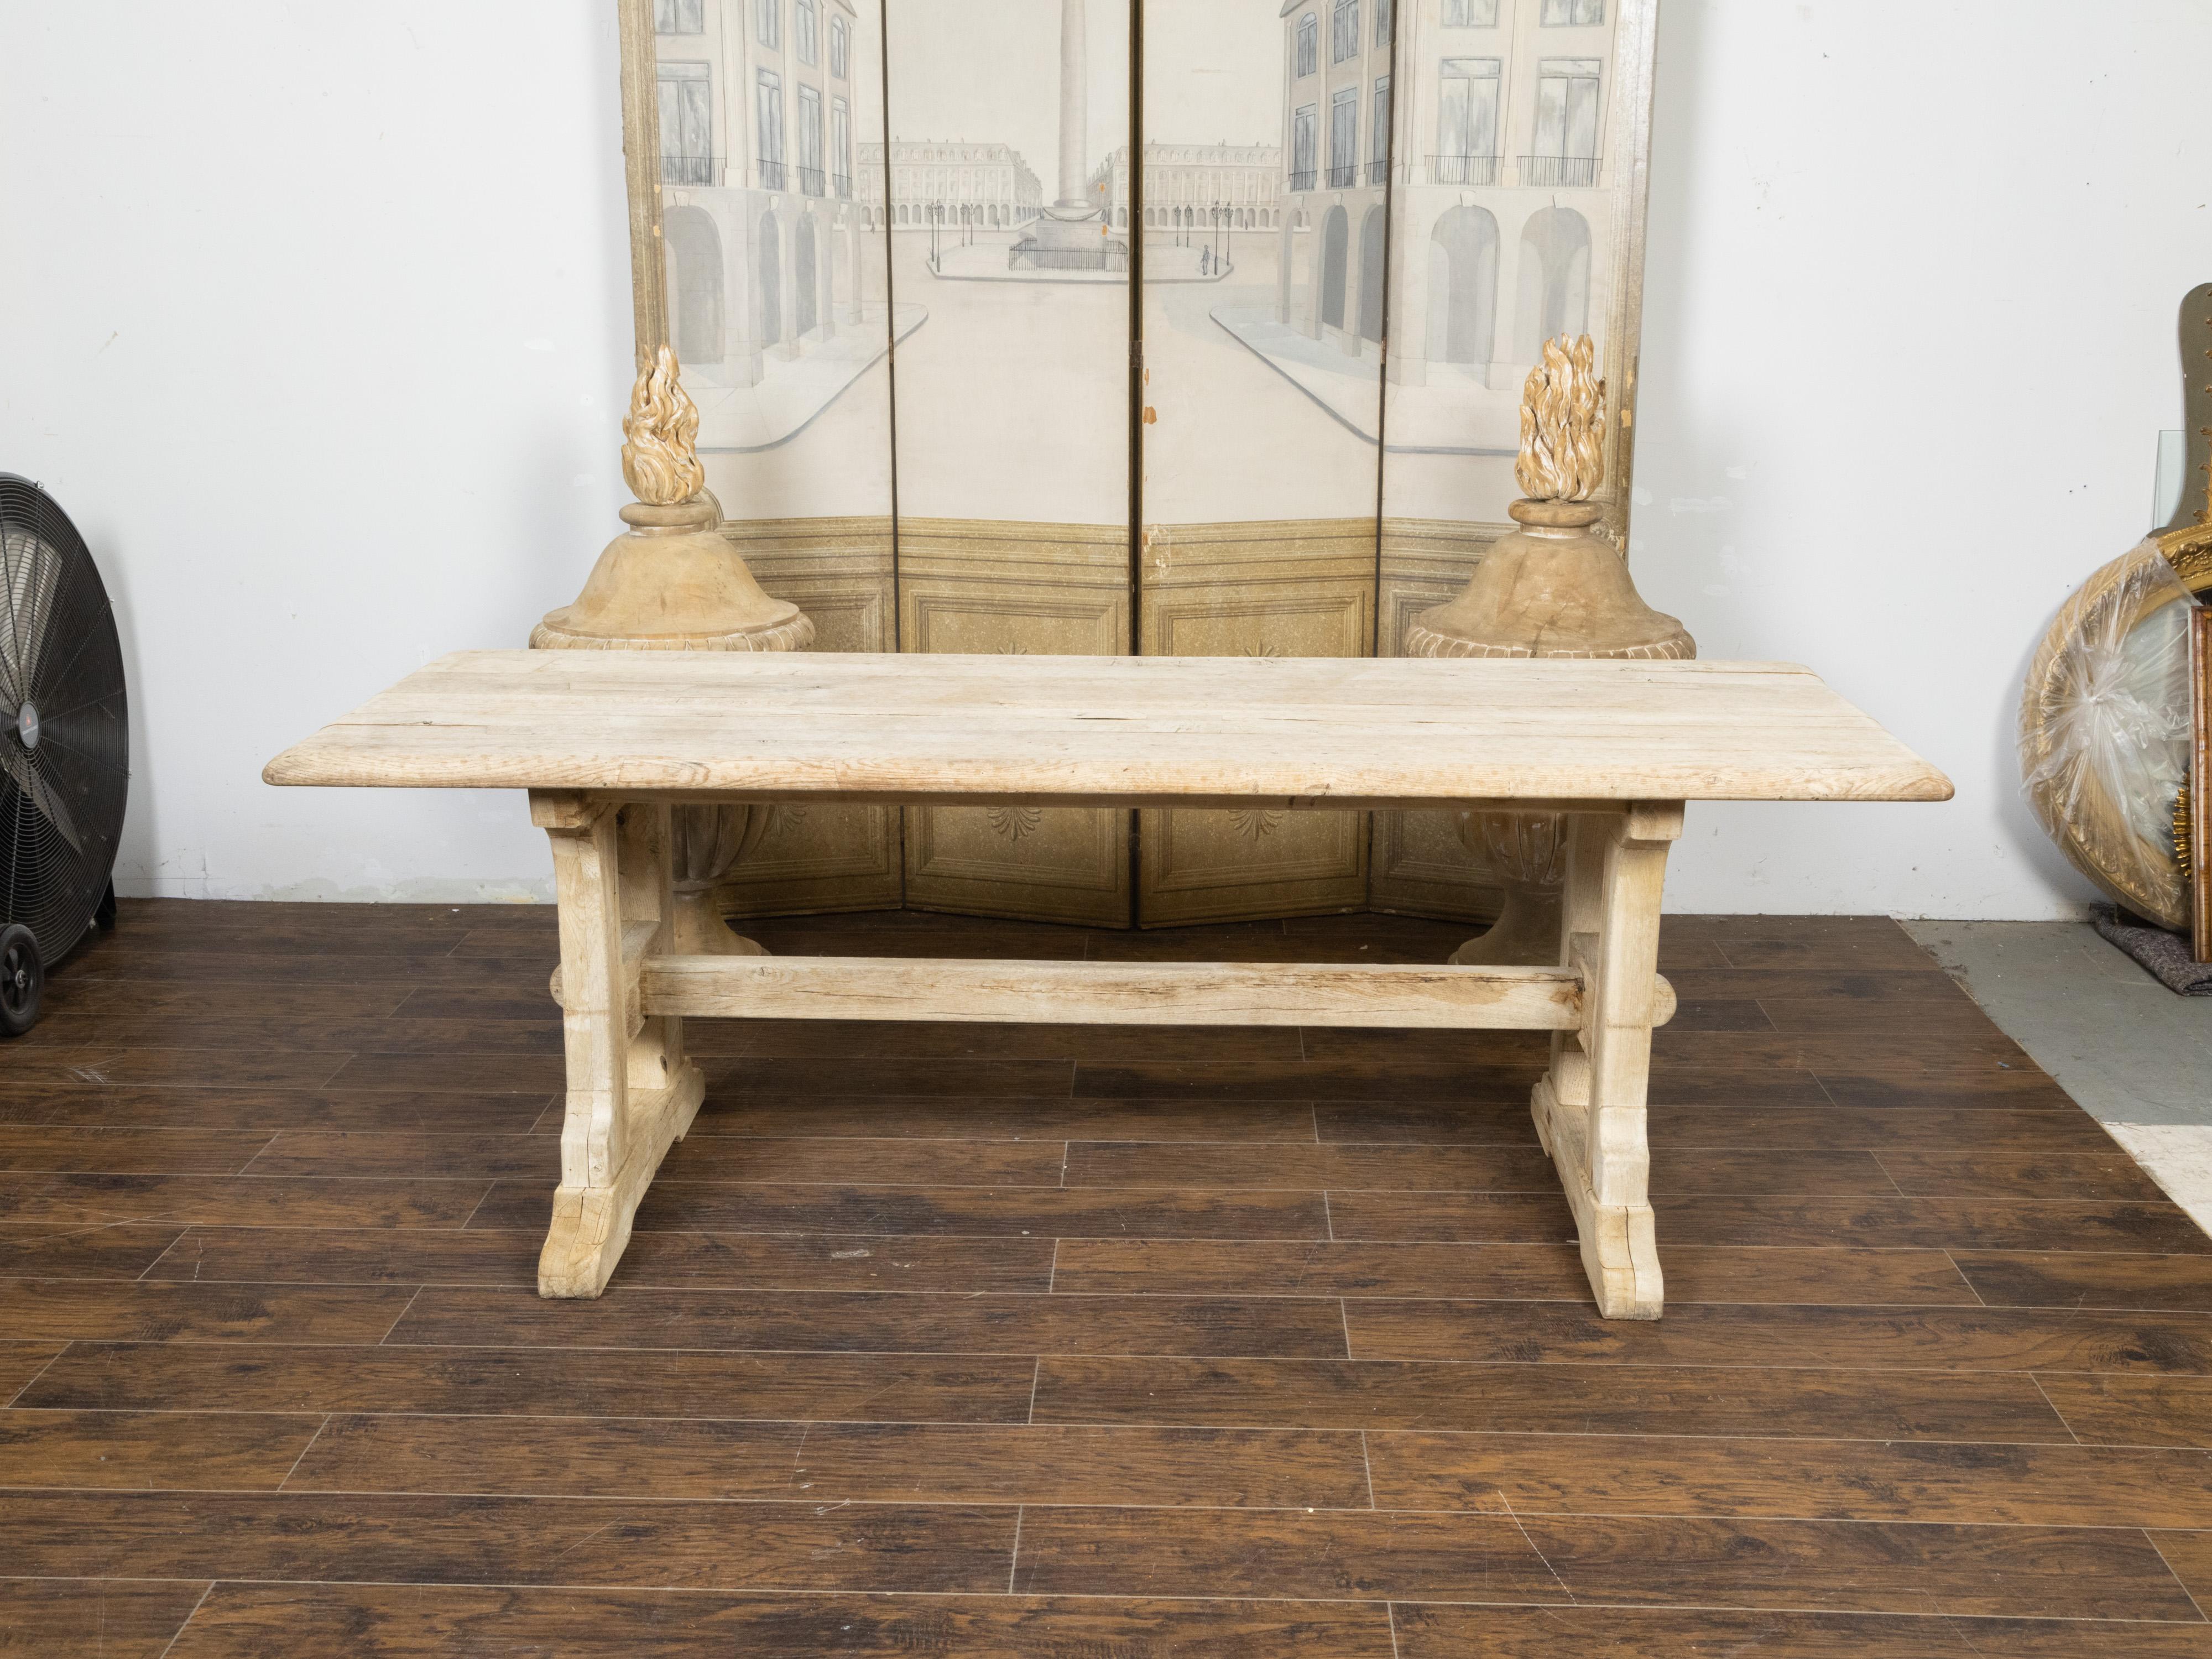 A rustic English natural wood farm table from the 19th century, with trestle base and weathered patina. Created in England during the 19th century, this farm table charms us with its rustic presence and natural grain. The table features a